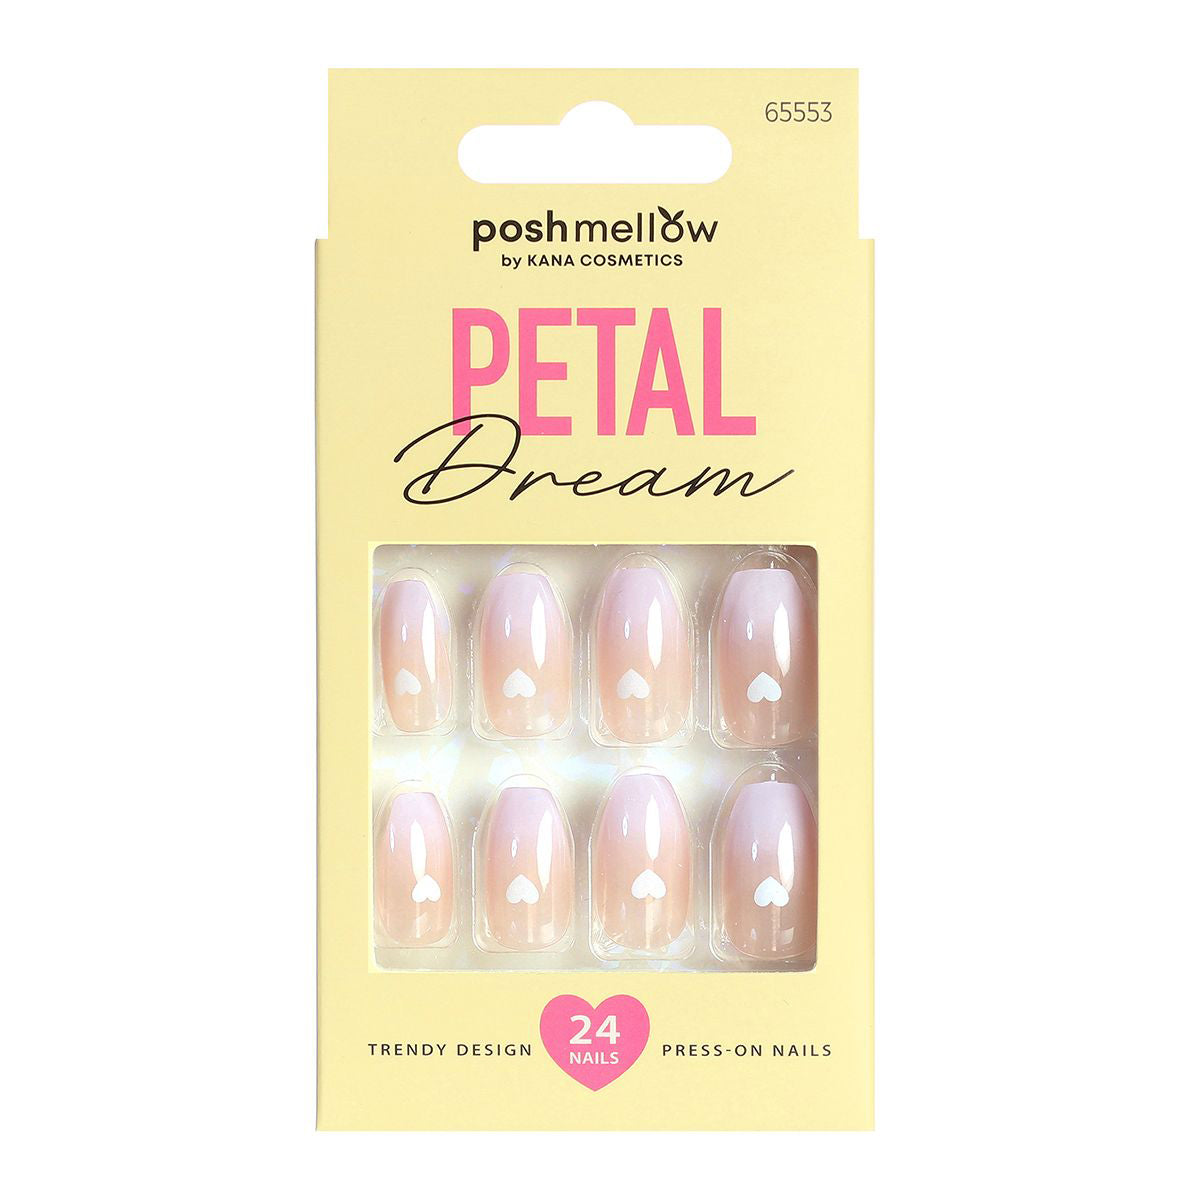 Get flawless looking fresh mani in minutes with our New Petal Dream Design Nails Collection! False nails in the chicest color and design mixes are ready-to-wear, durable, flexible, and so easy to apply!  Chip proof, smudge proof &amp; no dry time! Includes 24 press-on nails to find your perfect fit Ultra Strong Nail Glue Why we love, Petal Dream Collection: Chic colors and styles to create the perfect look! Ready to wear nails that look natural, and feel comfortable.